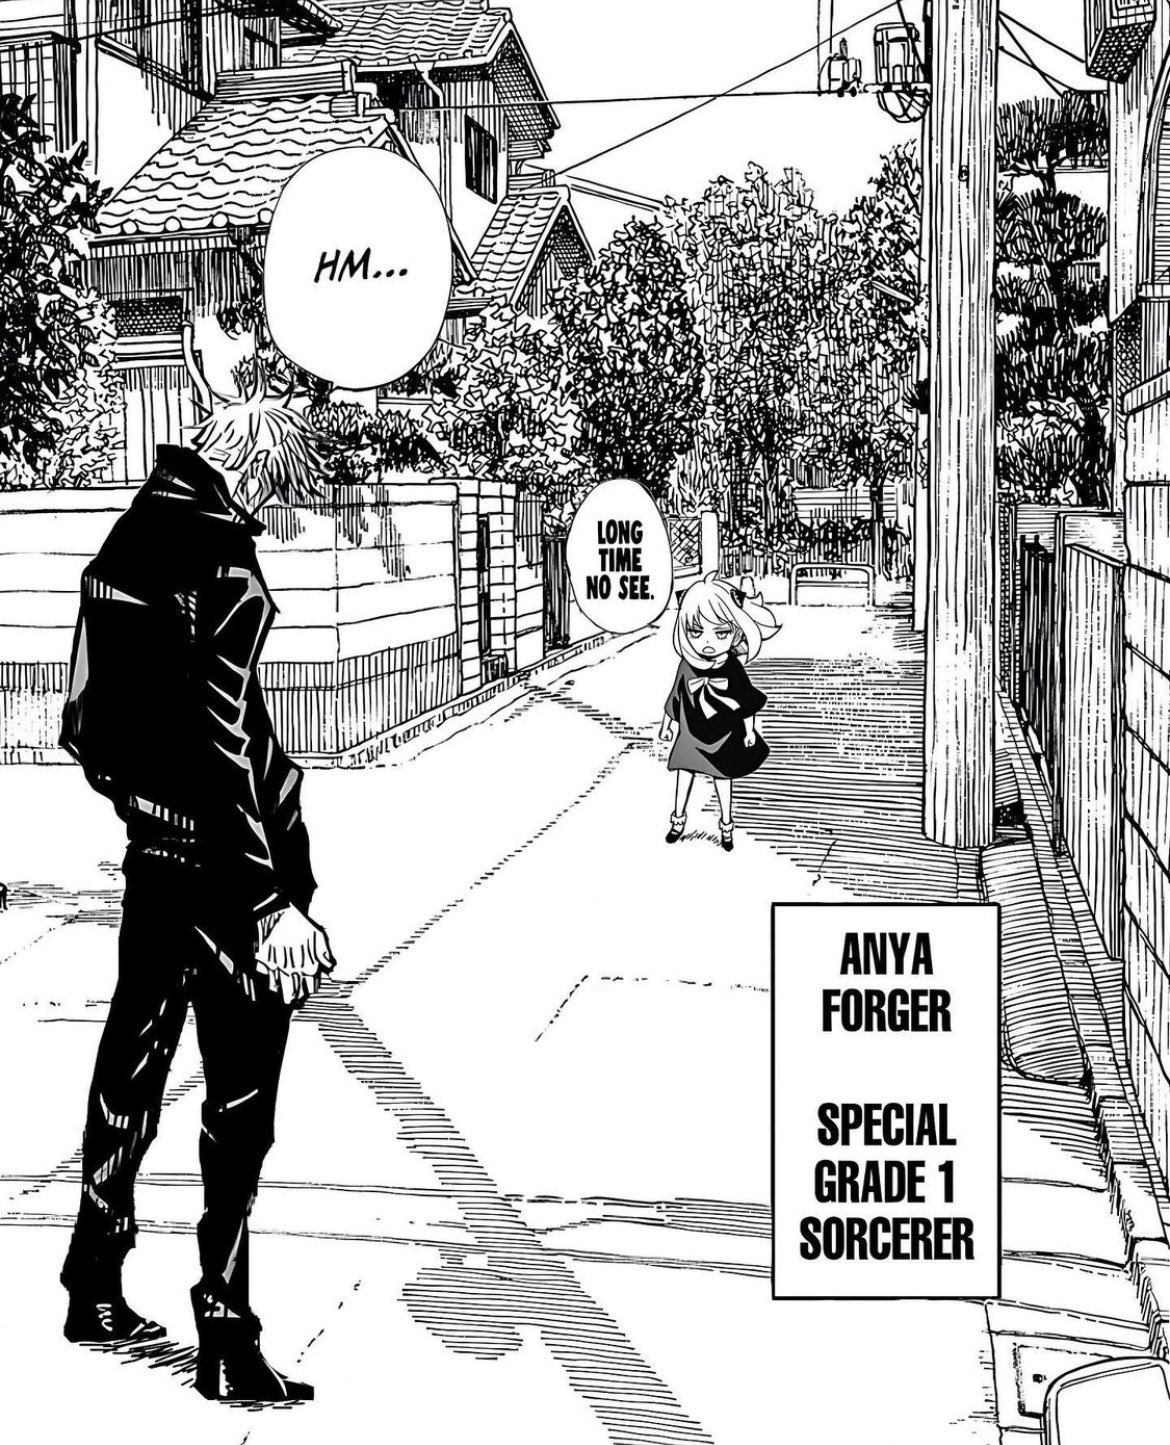 Inigma on X: Compilation Thread of Anya in Manga panels I've acquired   / X